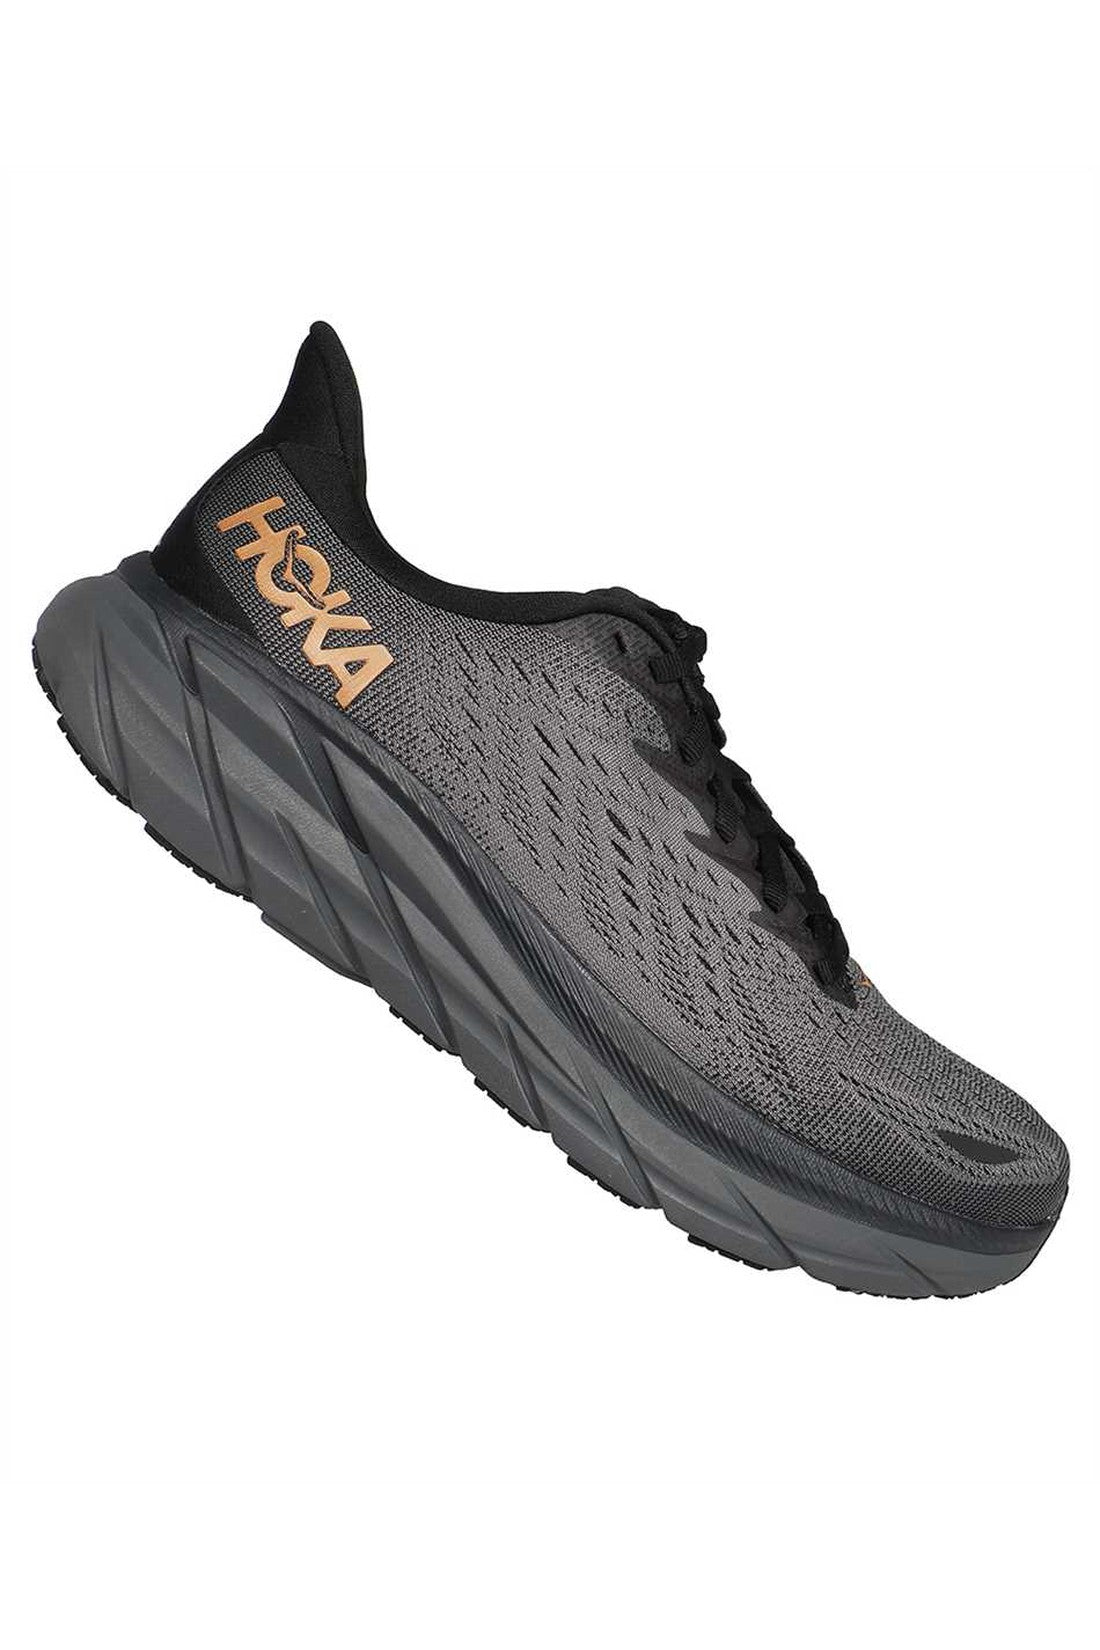 Low-top sneakers-Hoka One One-OUTLET-SALE-ARCHIVIST